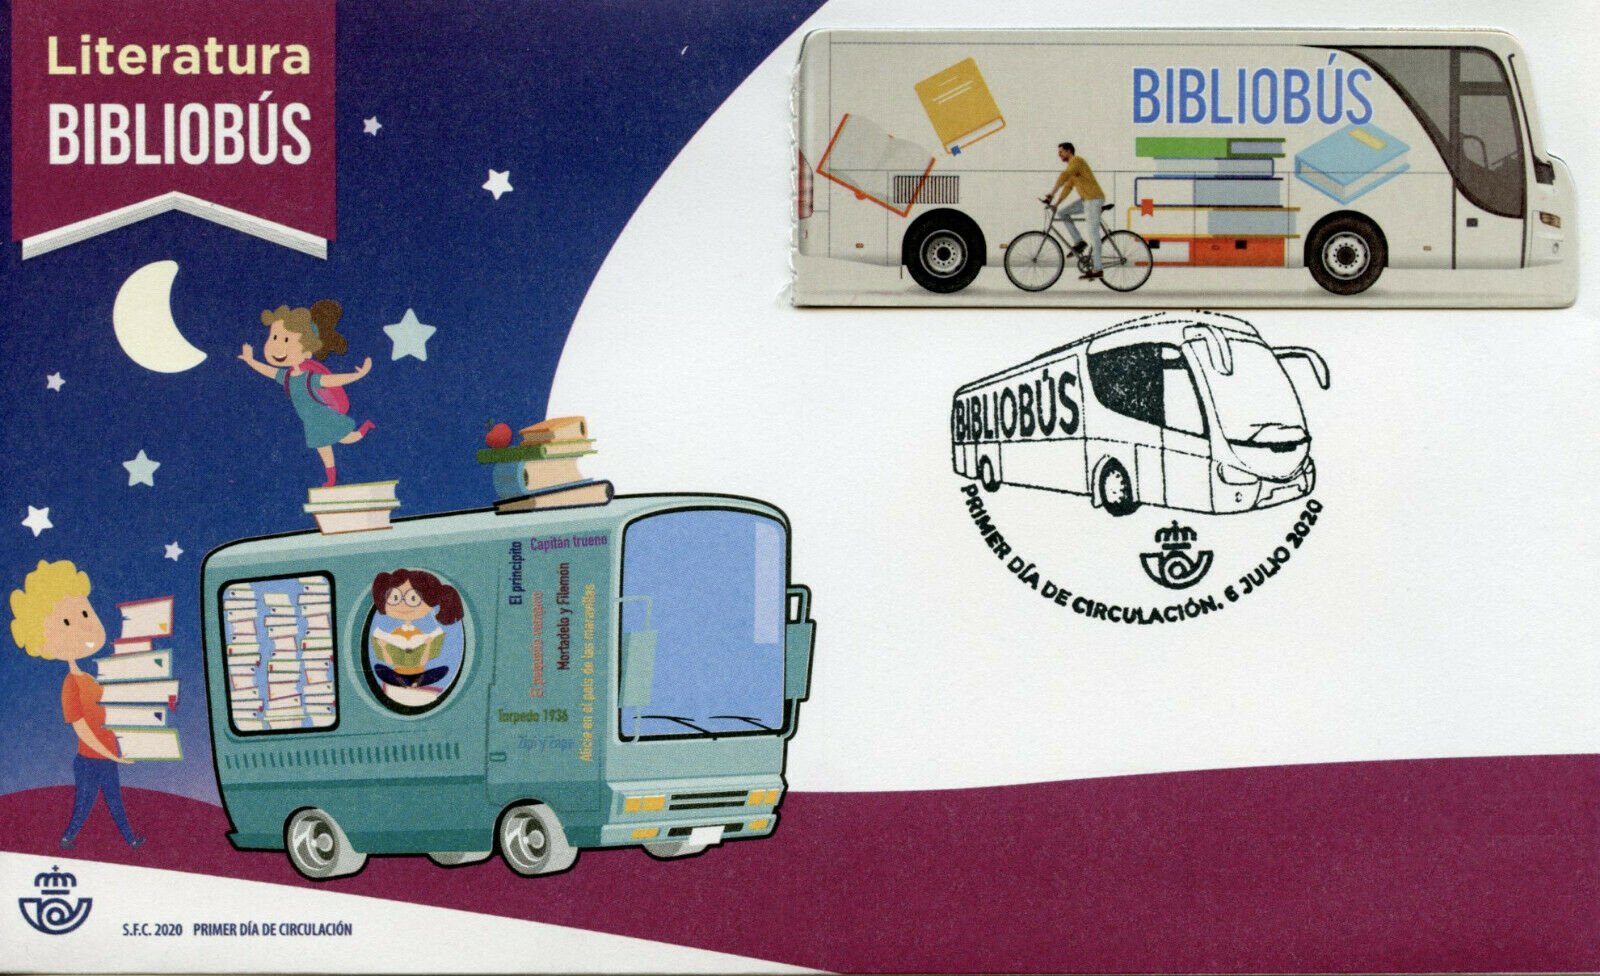 Spain Transport Stamps 2020 FDC Bibliobus Buses Bicycles Books Library 1v Set